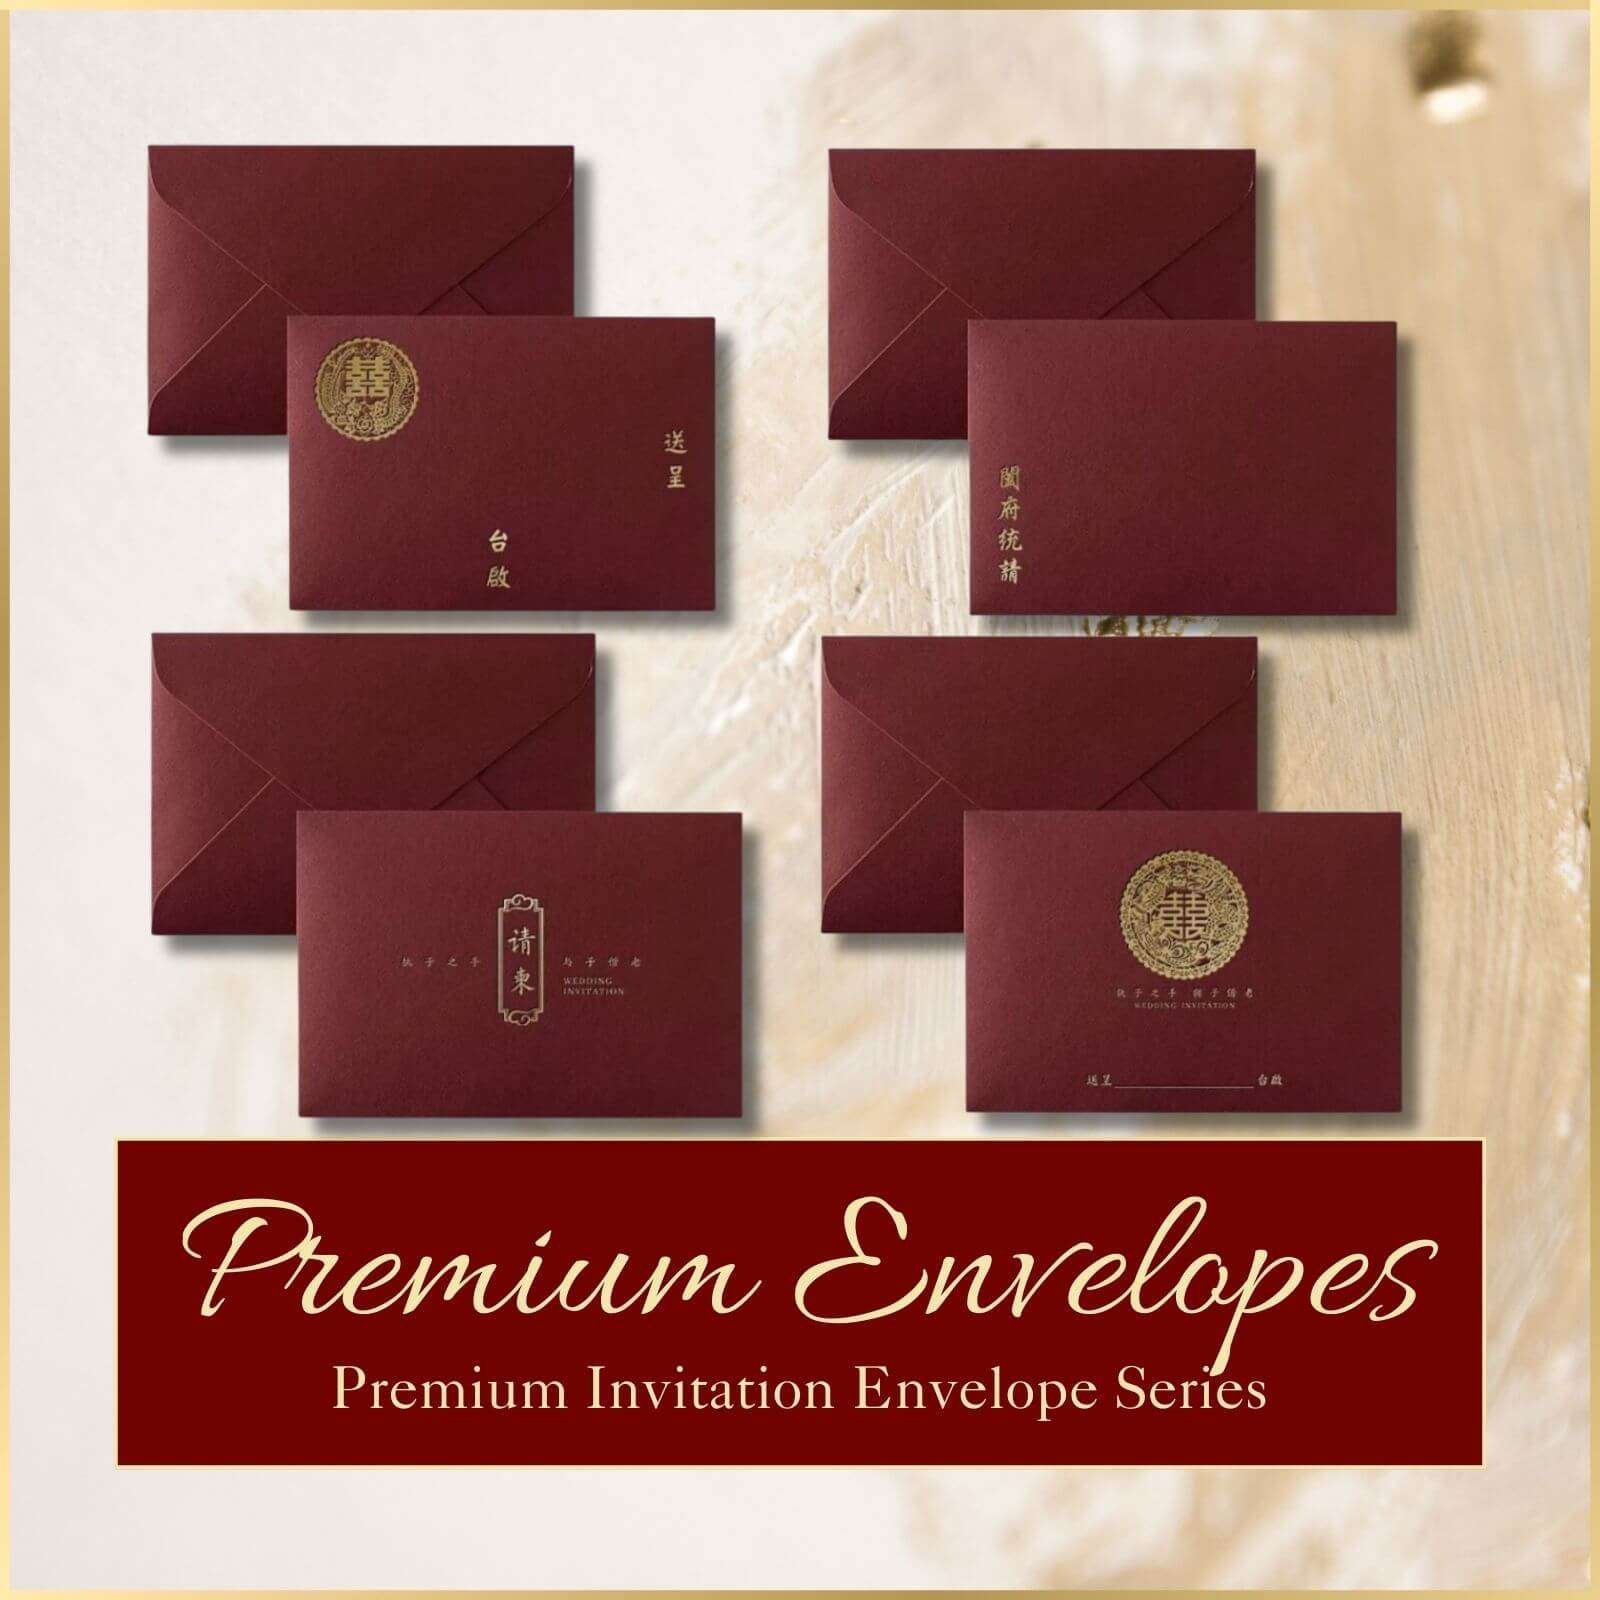 Assortment of premium wedding invitation envelopes in burgundy with gold lettering and seals.